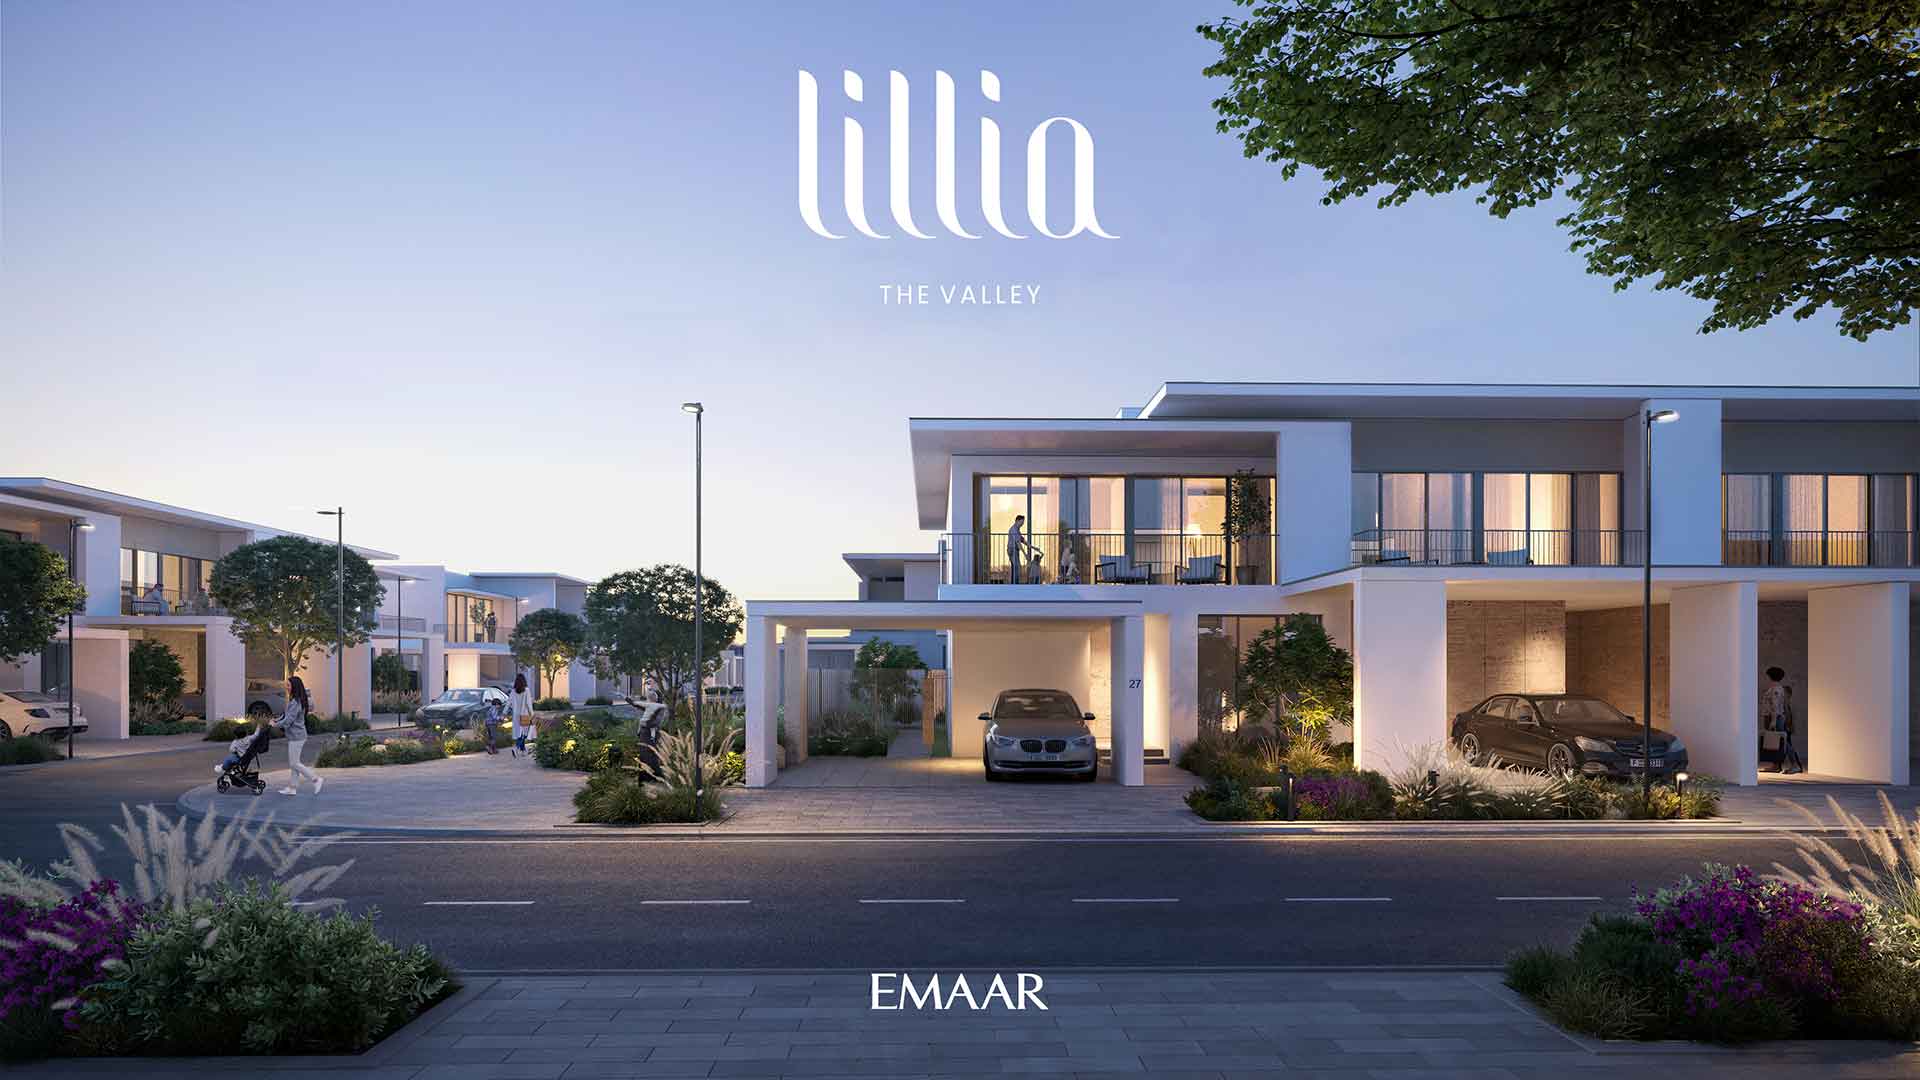 Lillia Townhouses For Sale At The Valley, Dubai